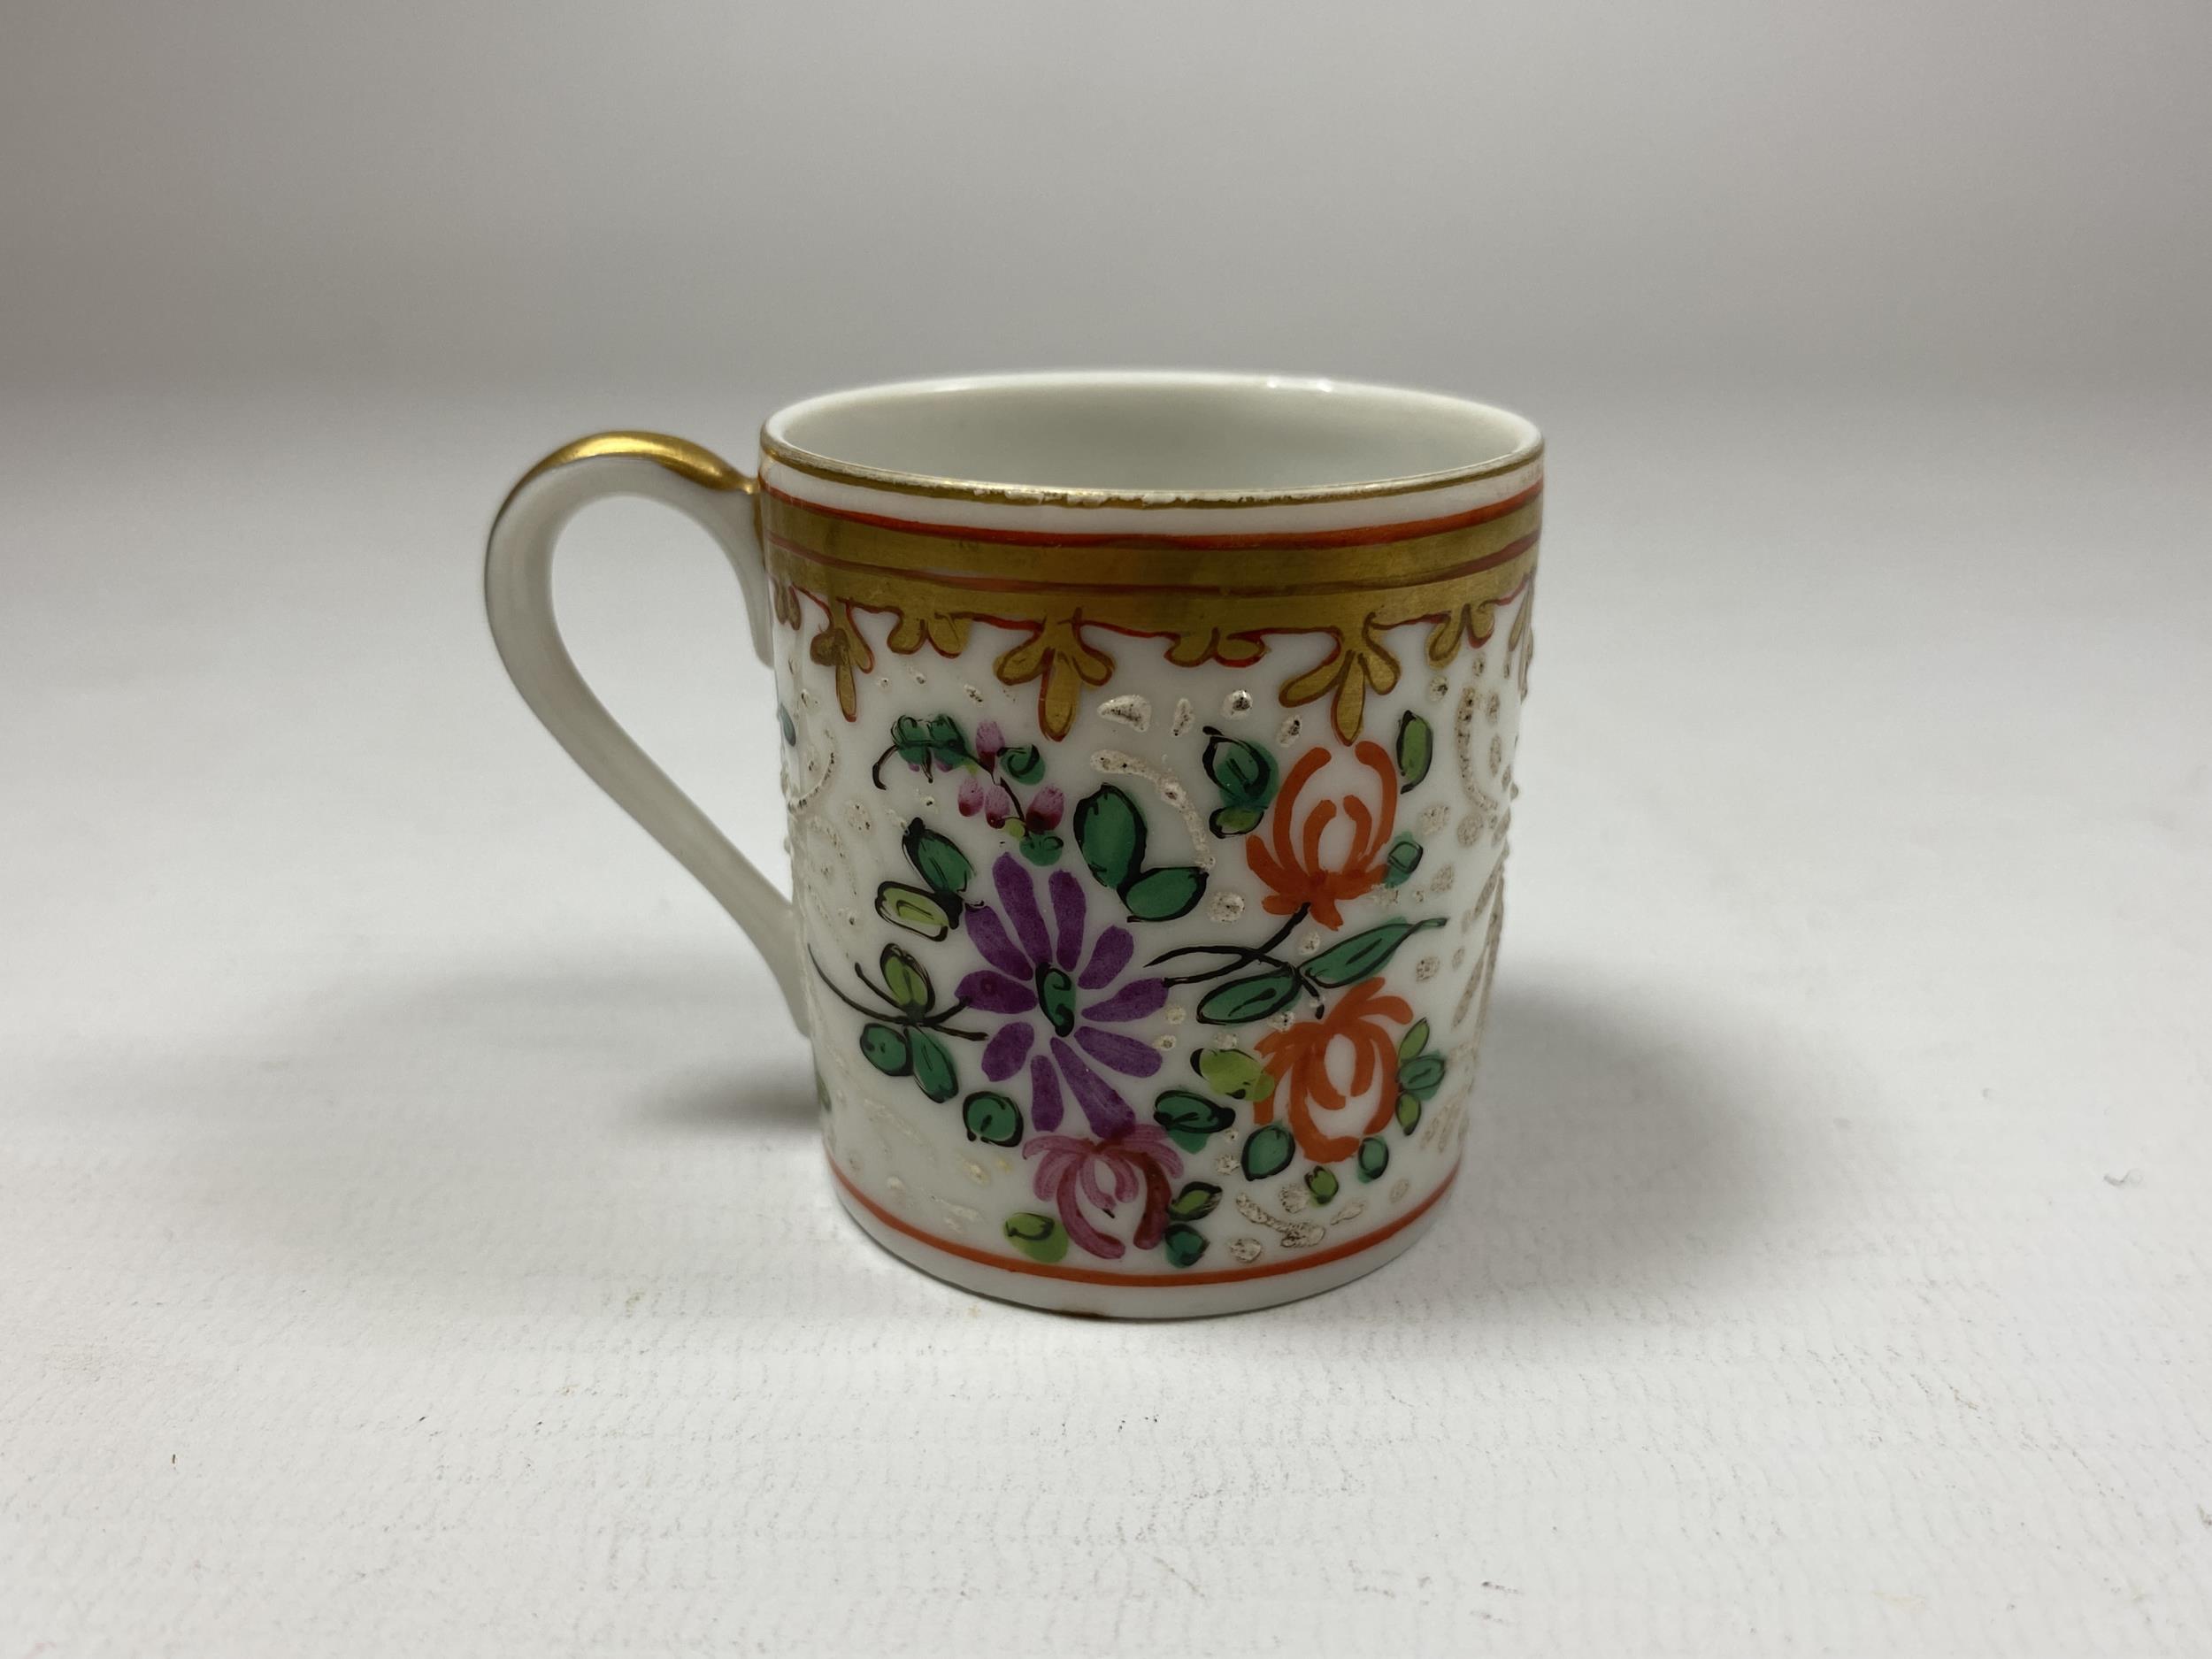 A MINIATURE 19TH CENTURY CHINESE EXPORT PORCELAIN TANKARD, HEIGHT 4CM